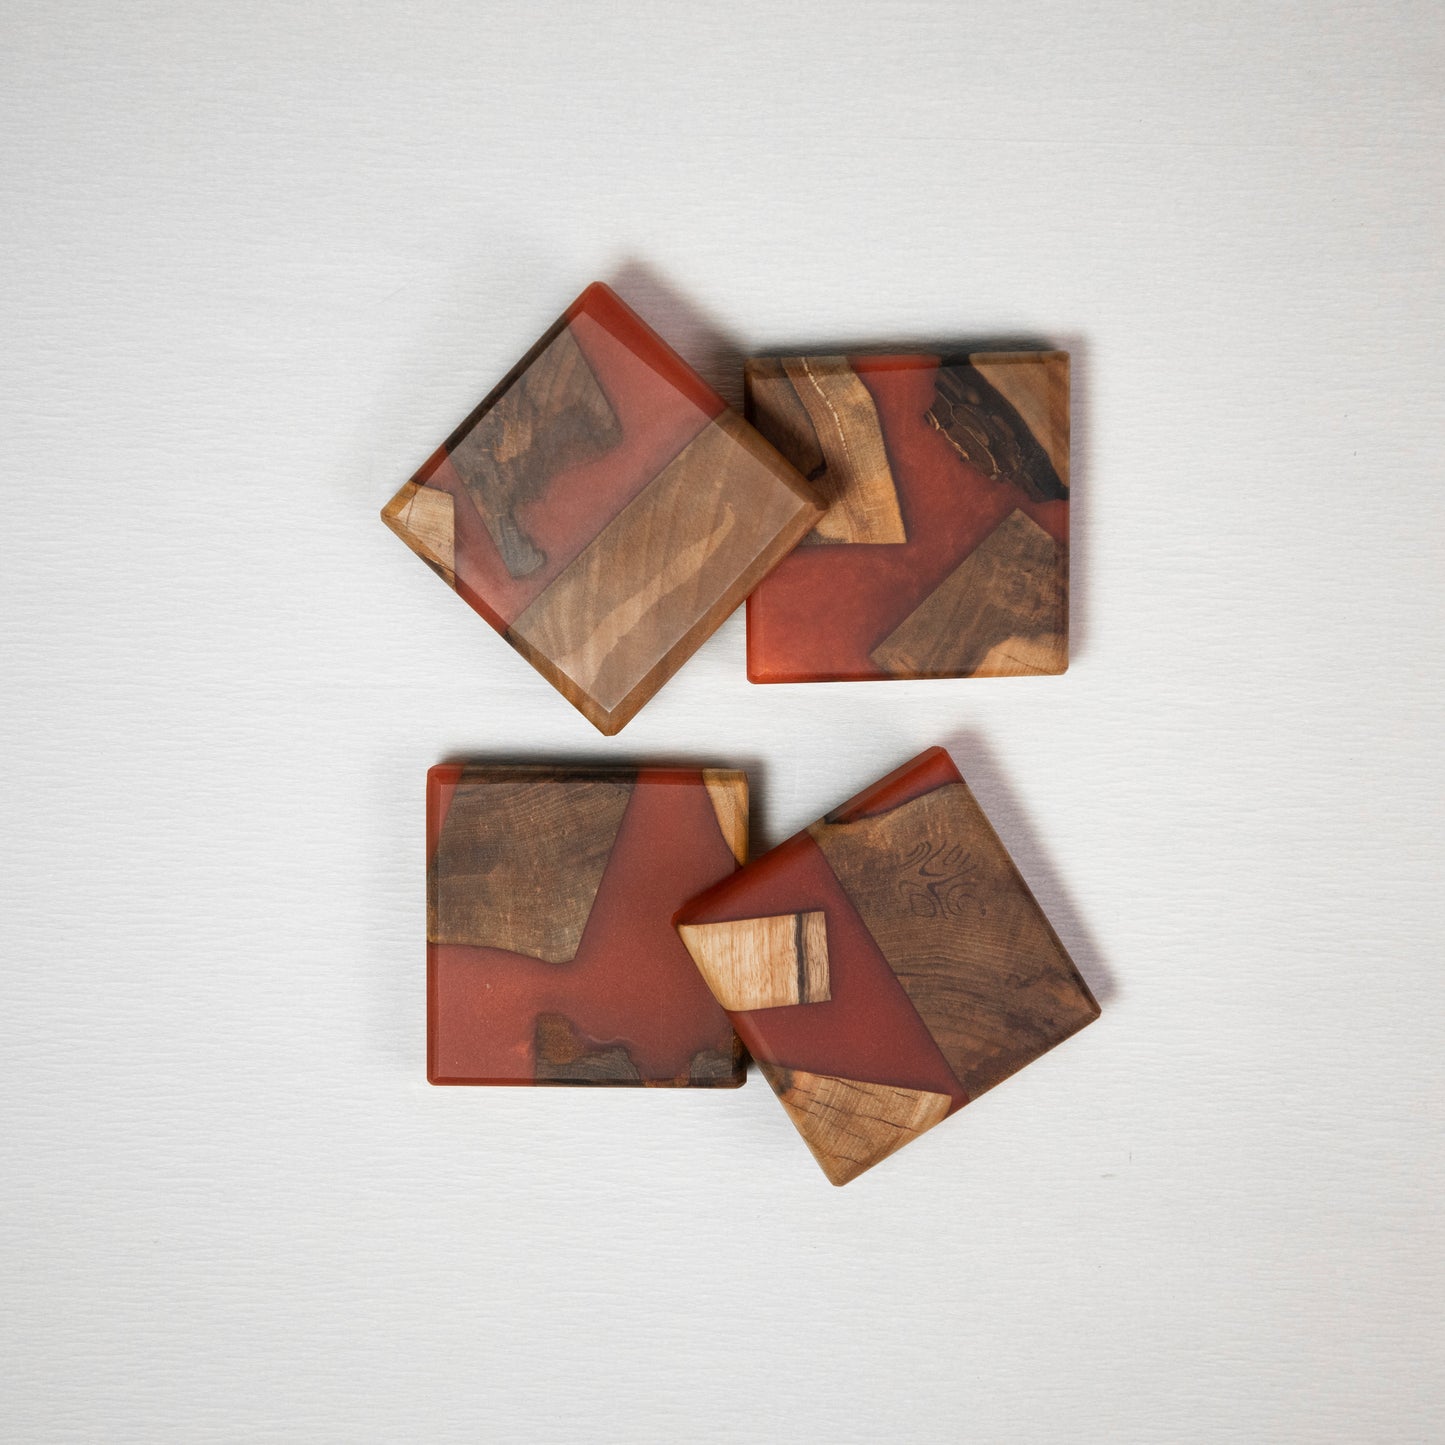 Four coasters made from wood and epoxy resin in the color red orange